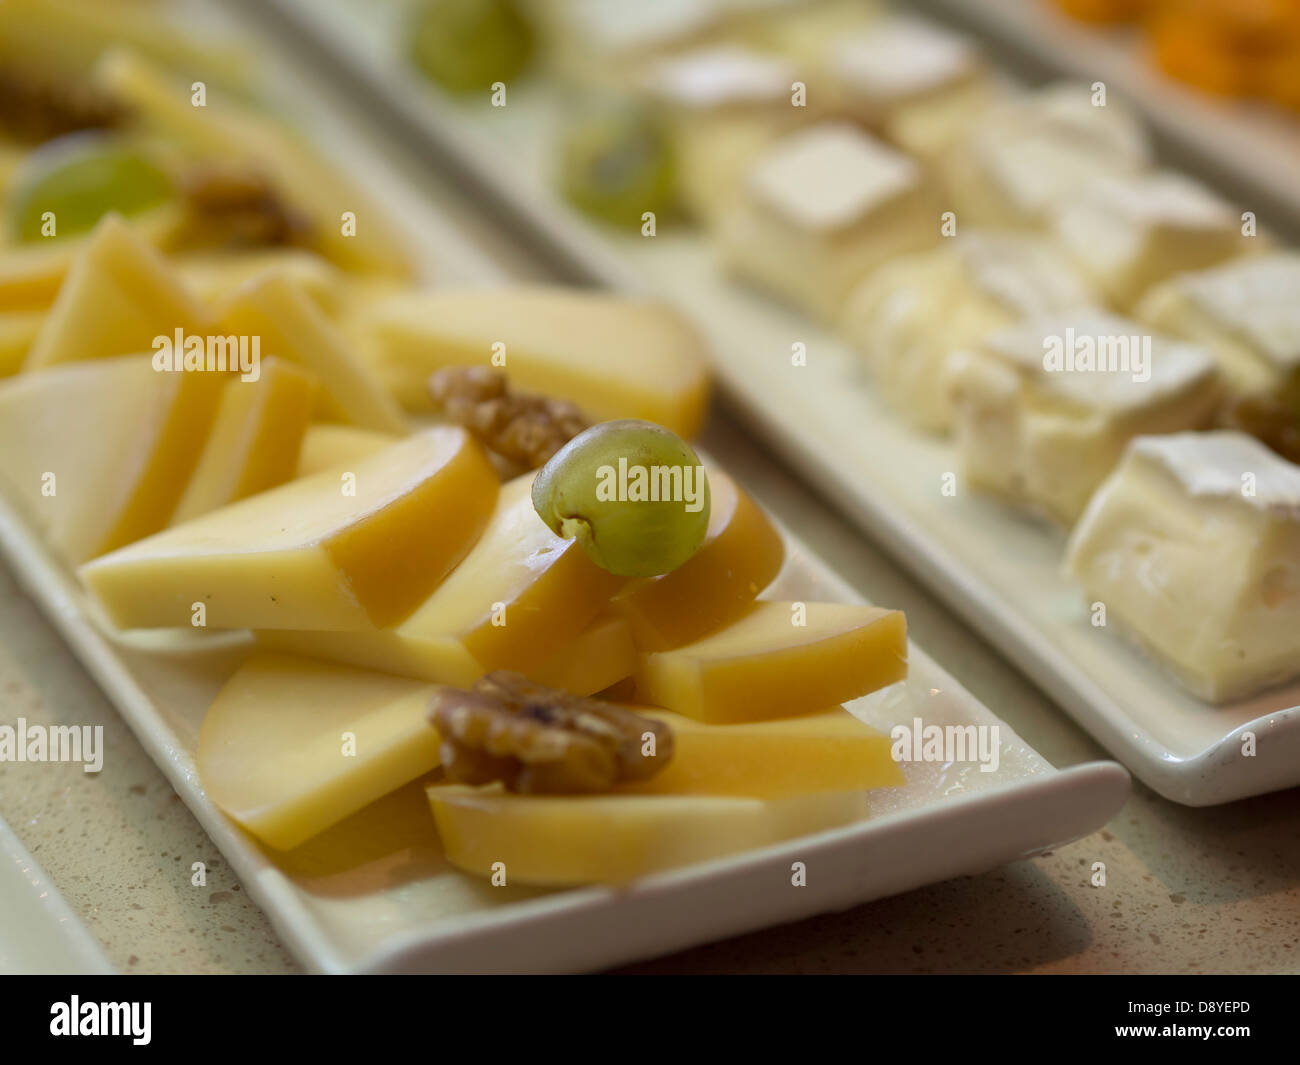 Cheese selection at hotel breakfast buffet table Stock Photo